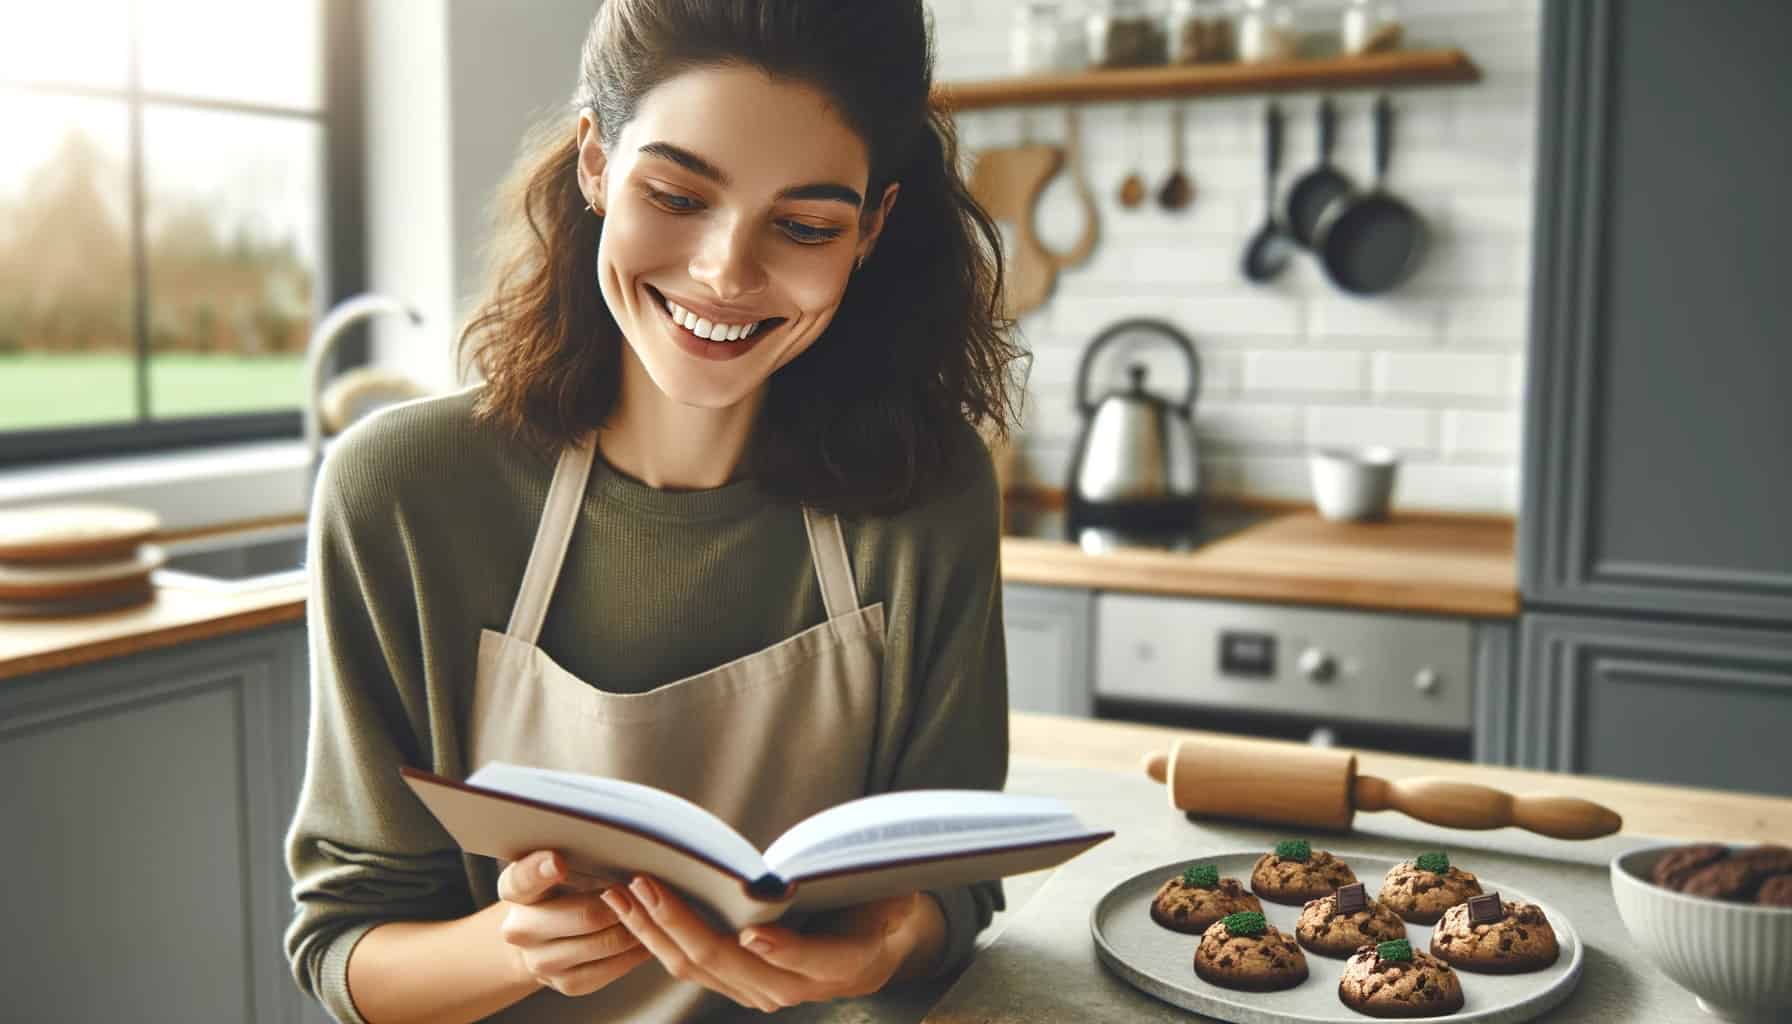 A plate of chocolate cookies on a kitchen bench in a modern kitchen reading a recipe book.